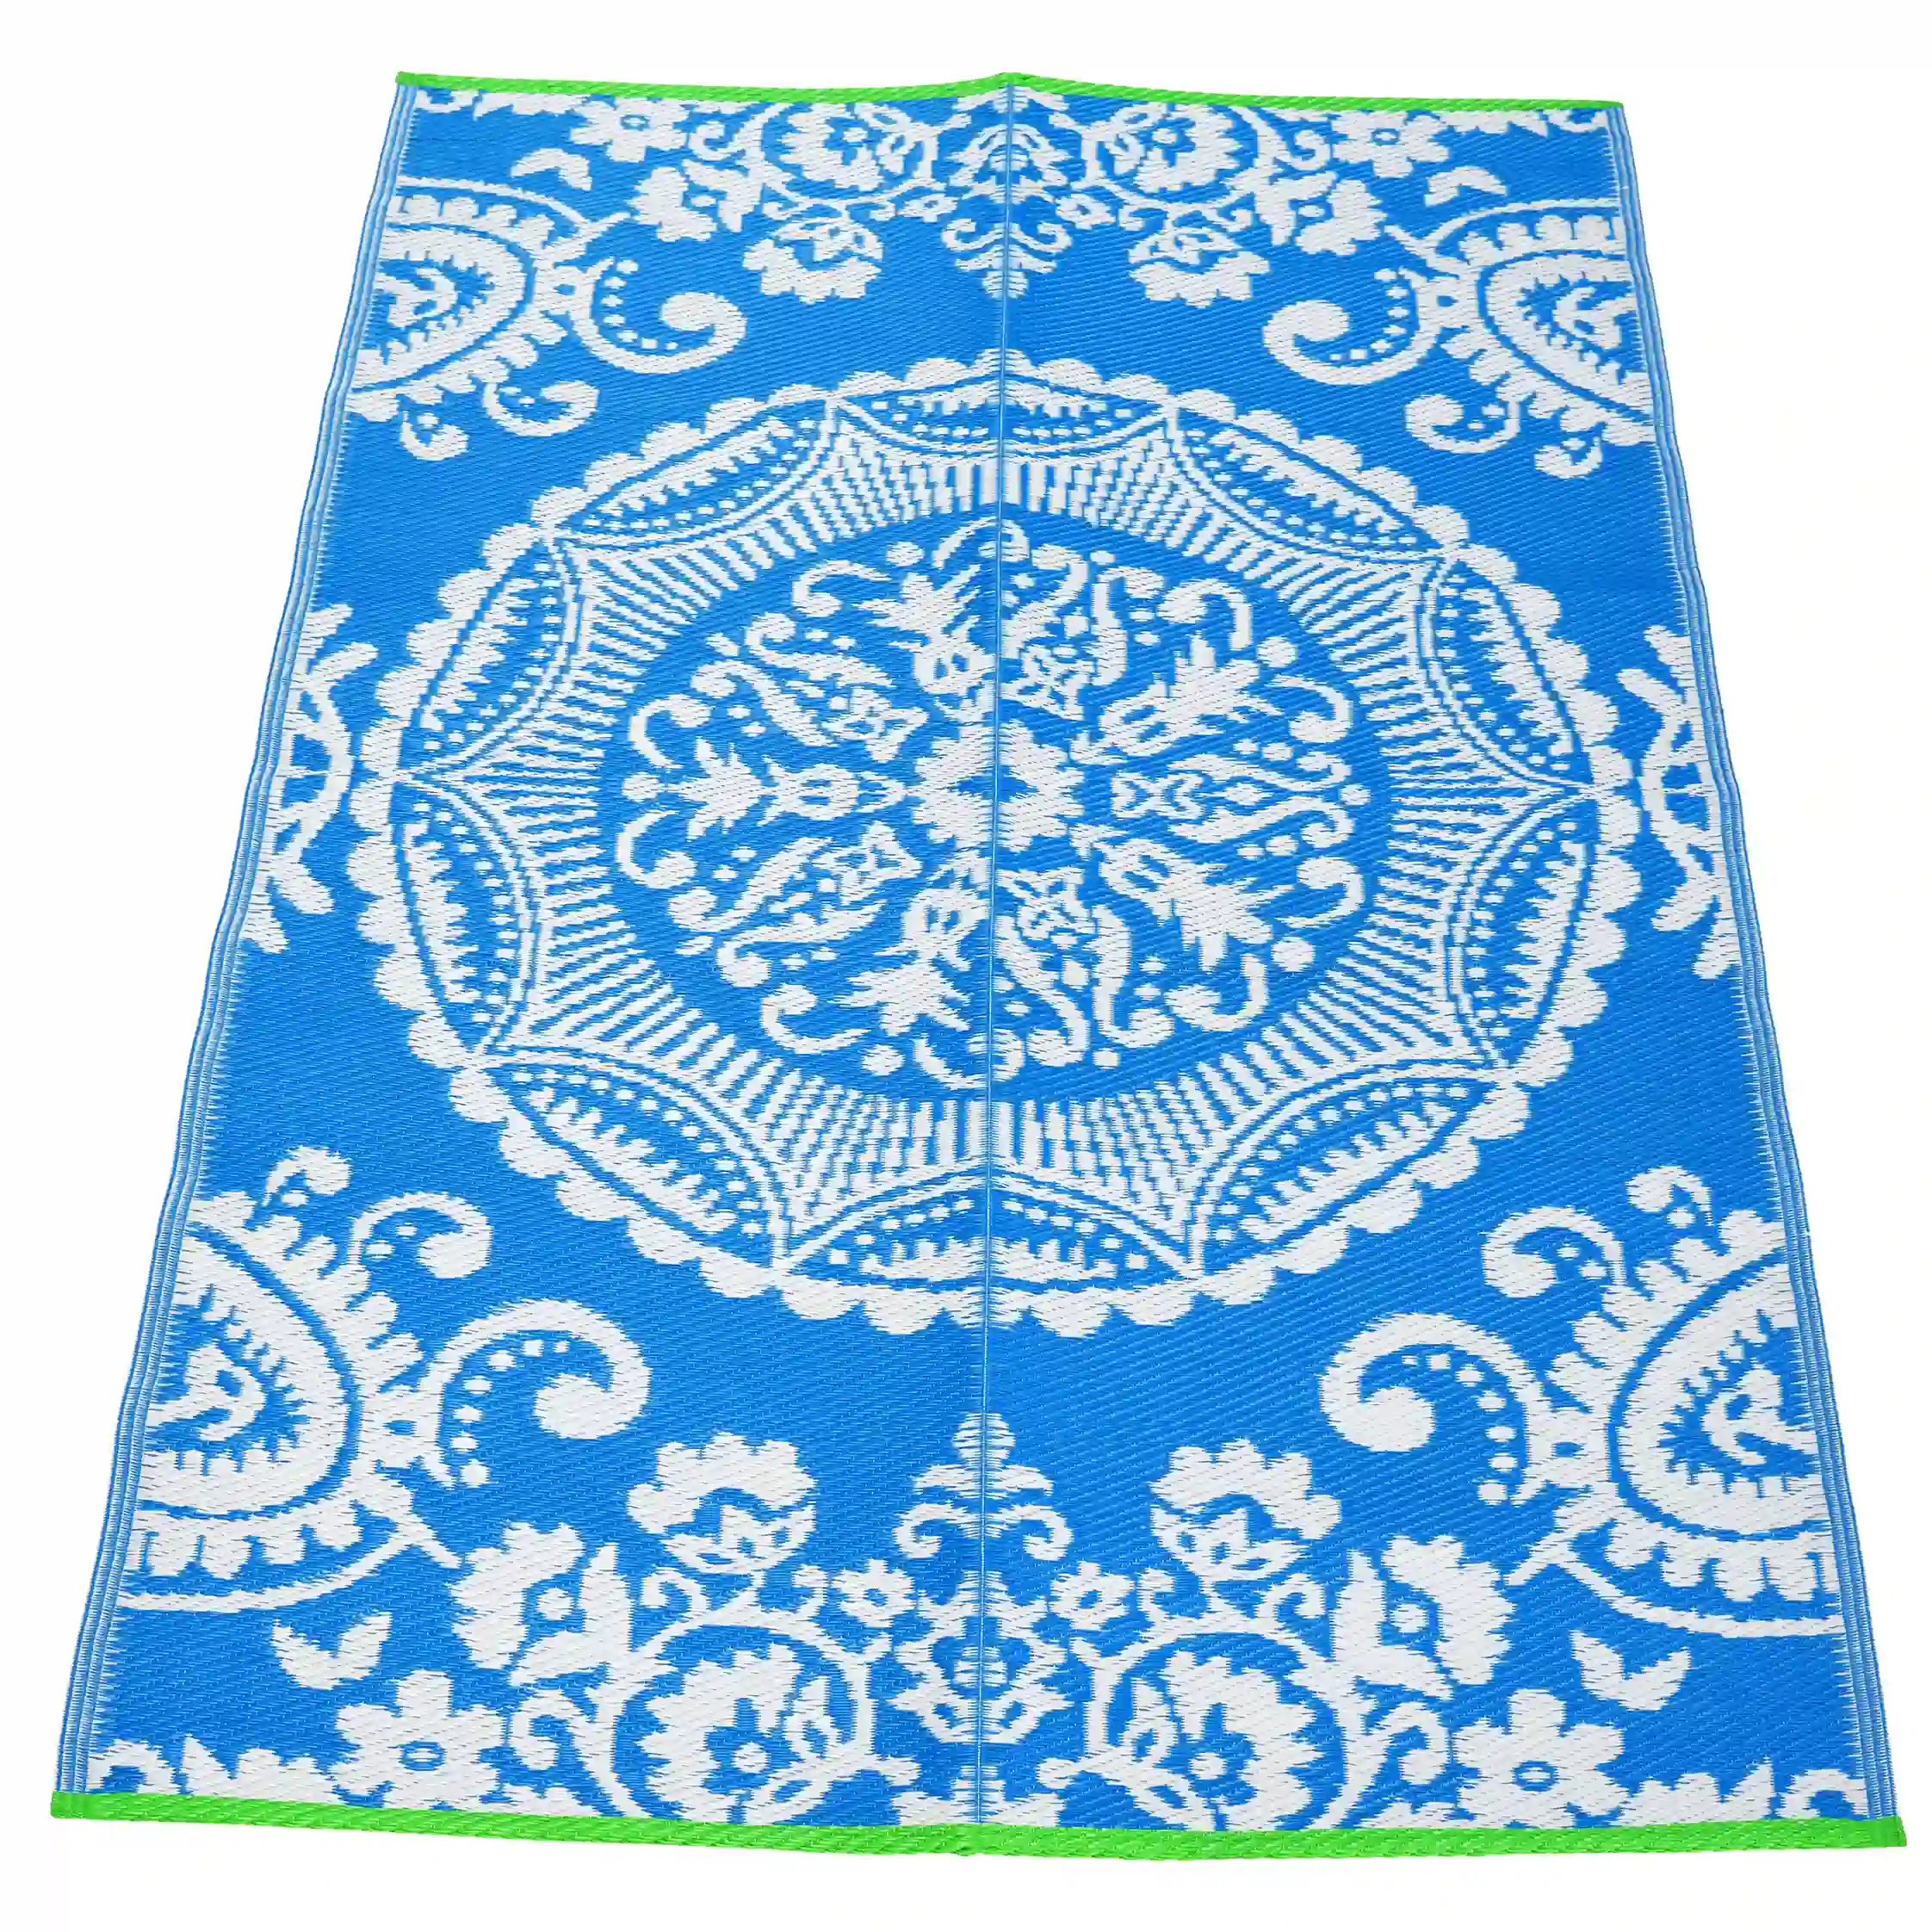 recycled outdoor rug (180 x 120 cm) - blue